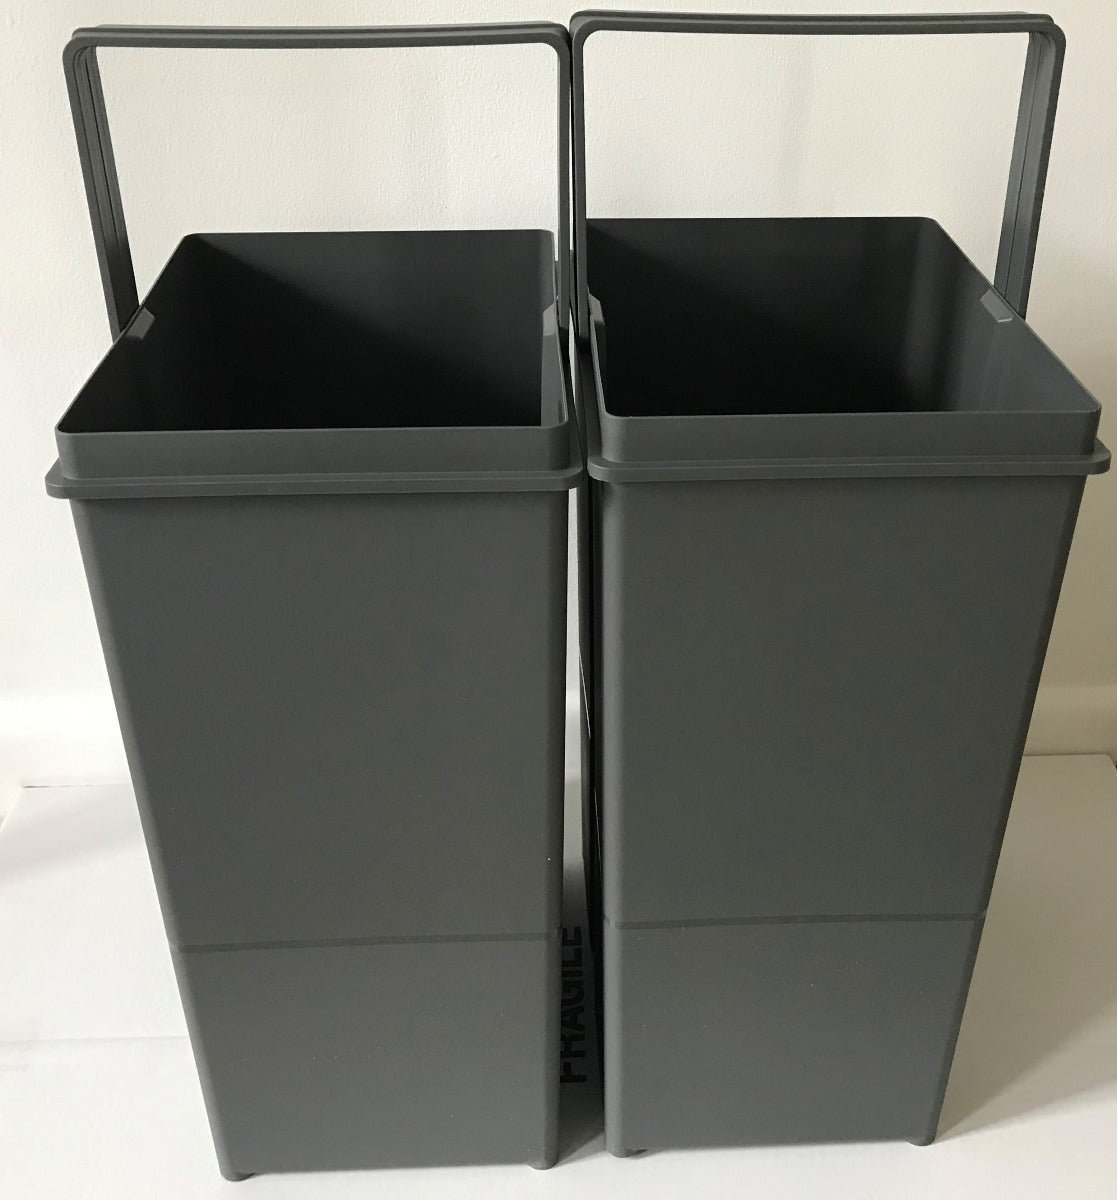 he dark grey plastic 58-litre buckets each have handles making them easy to remove